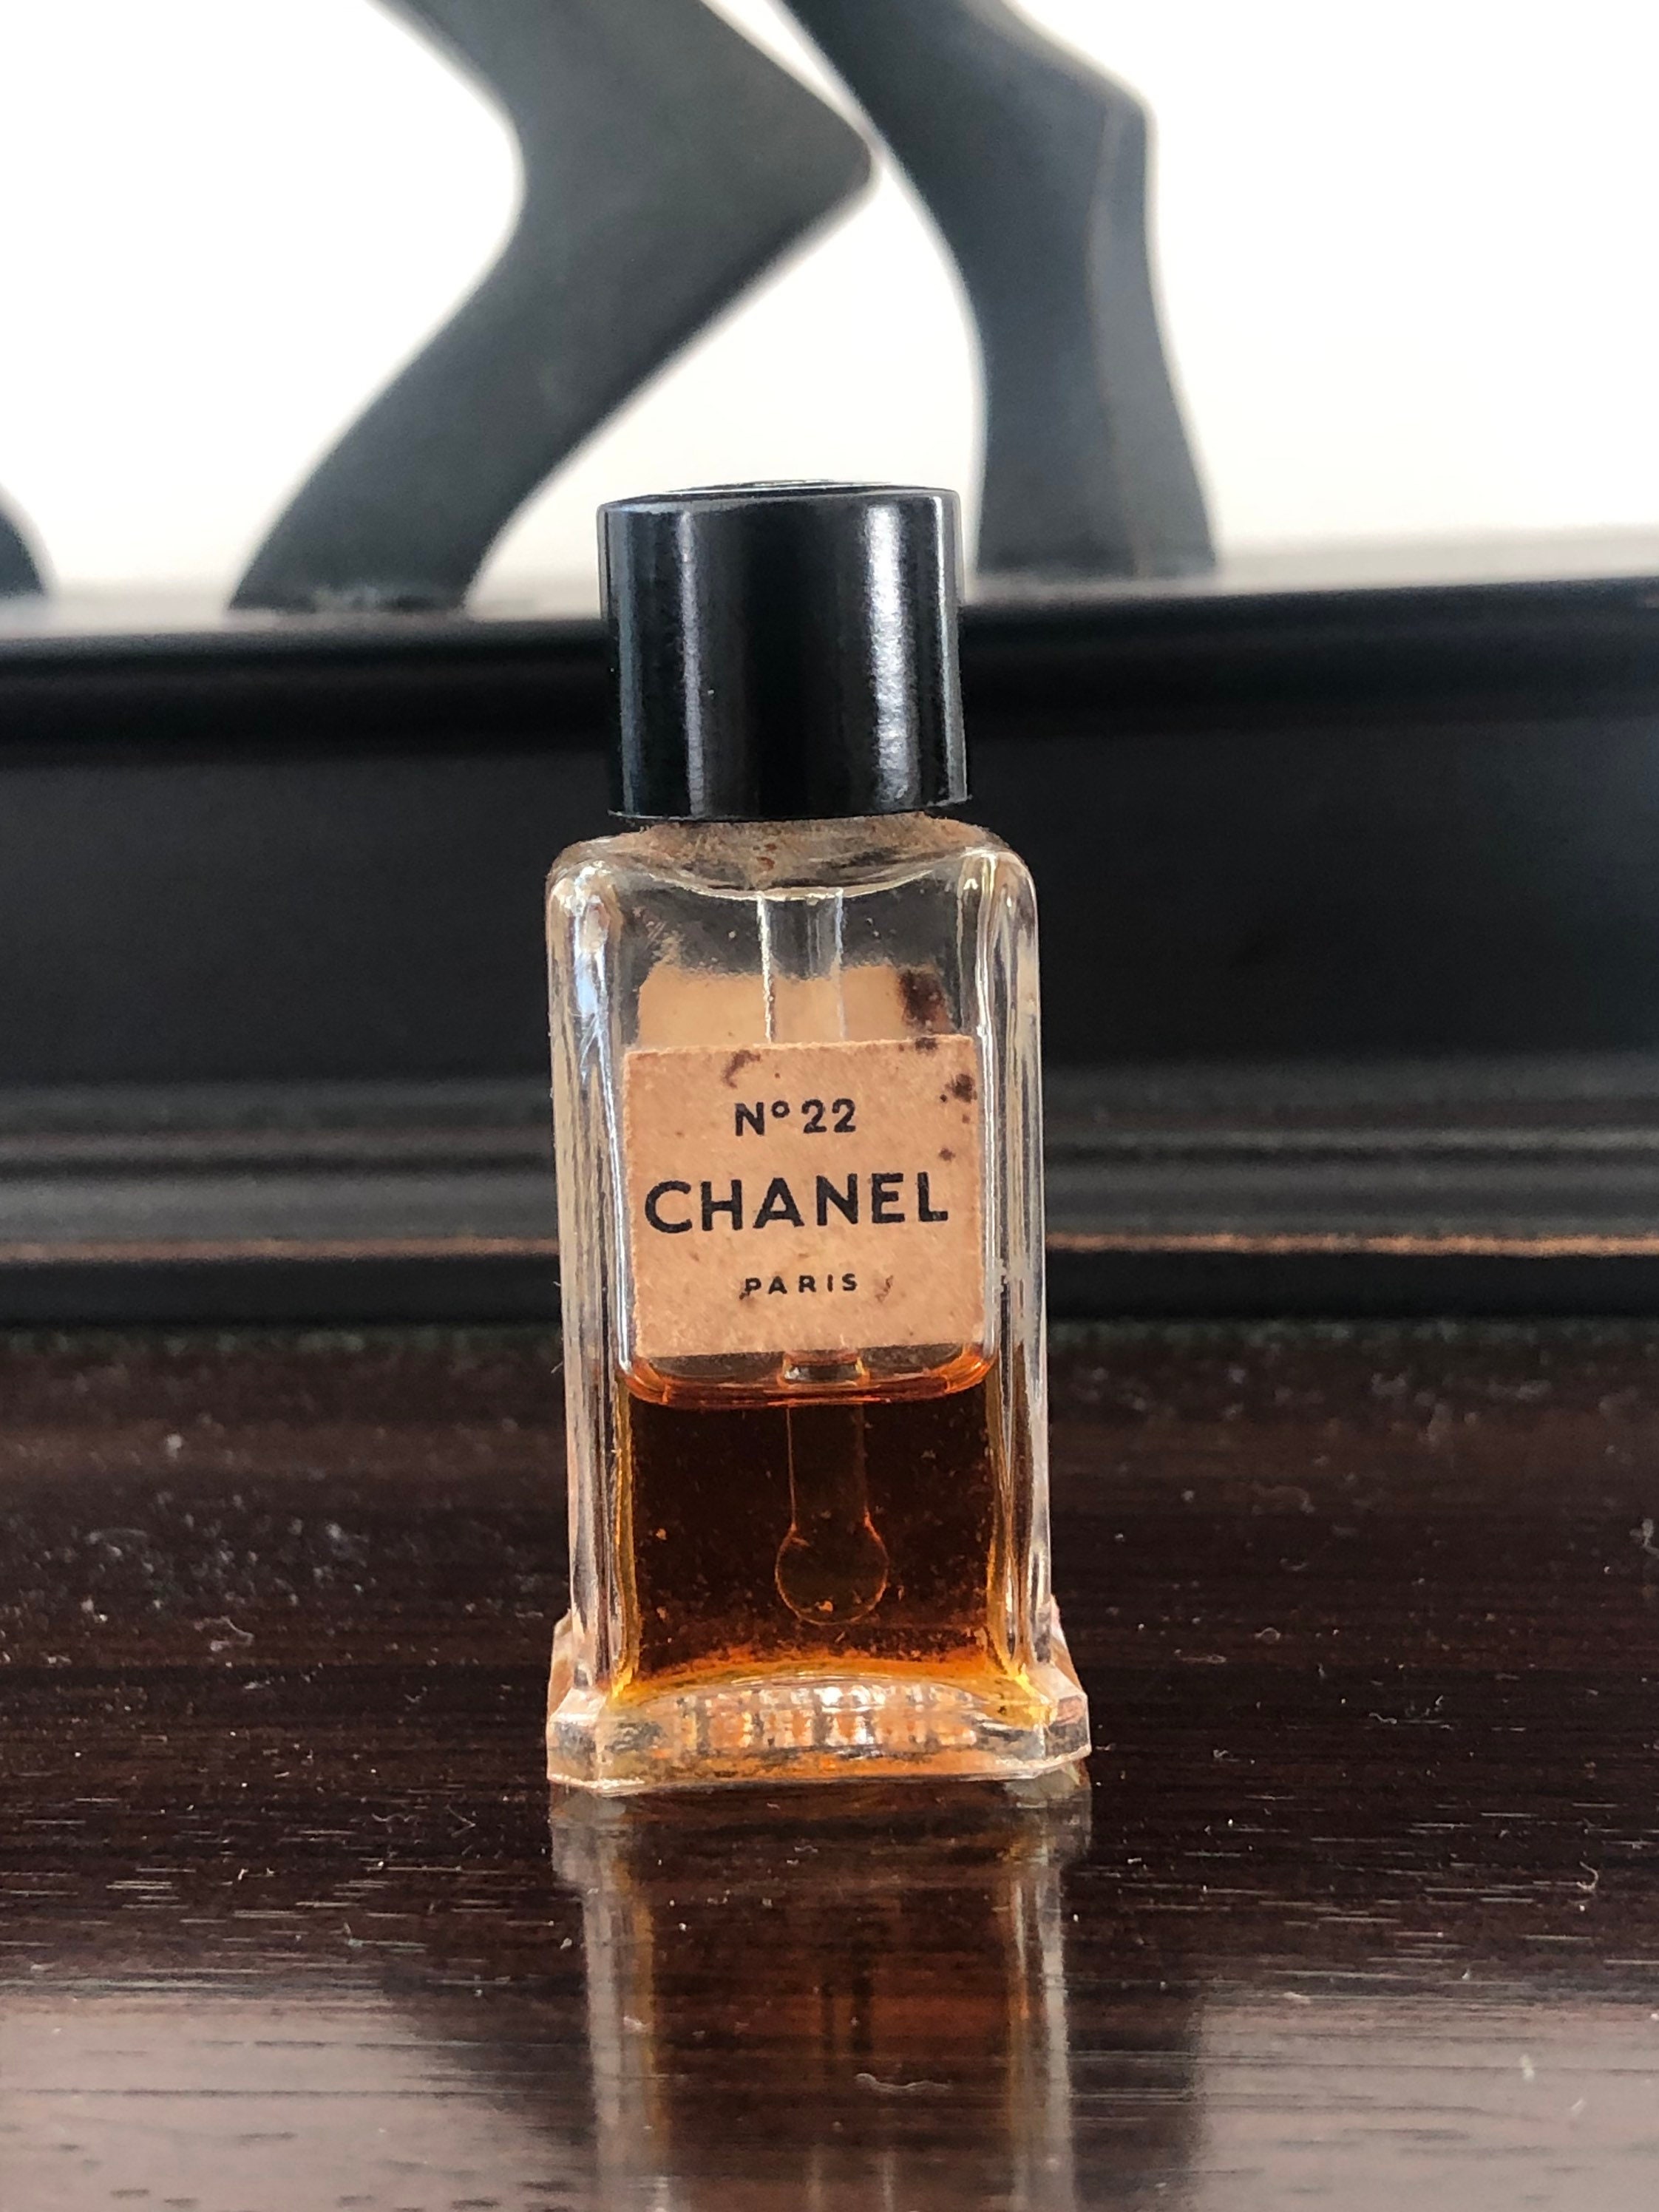 Each bottle of the Extrait perfume Chanel No. 5, a fragrance